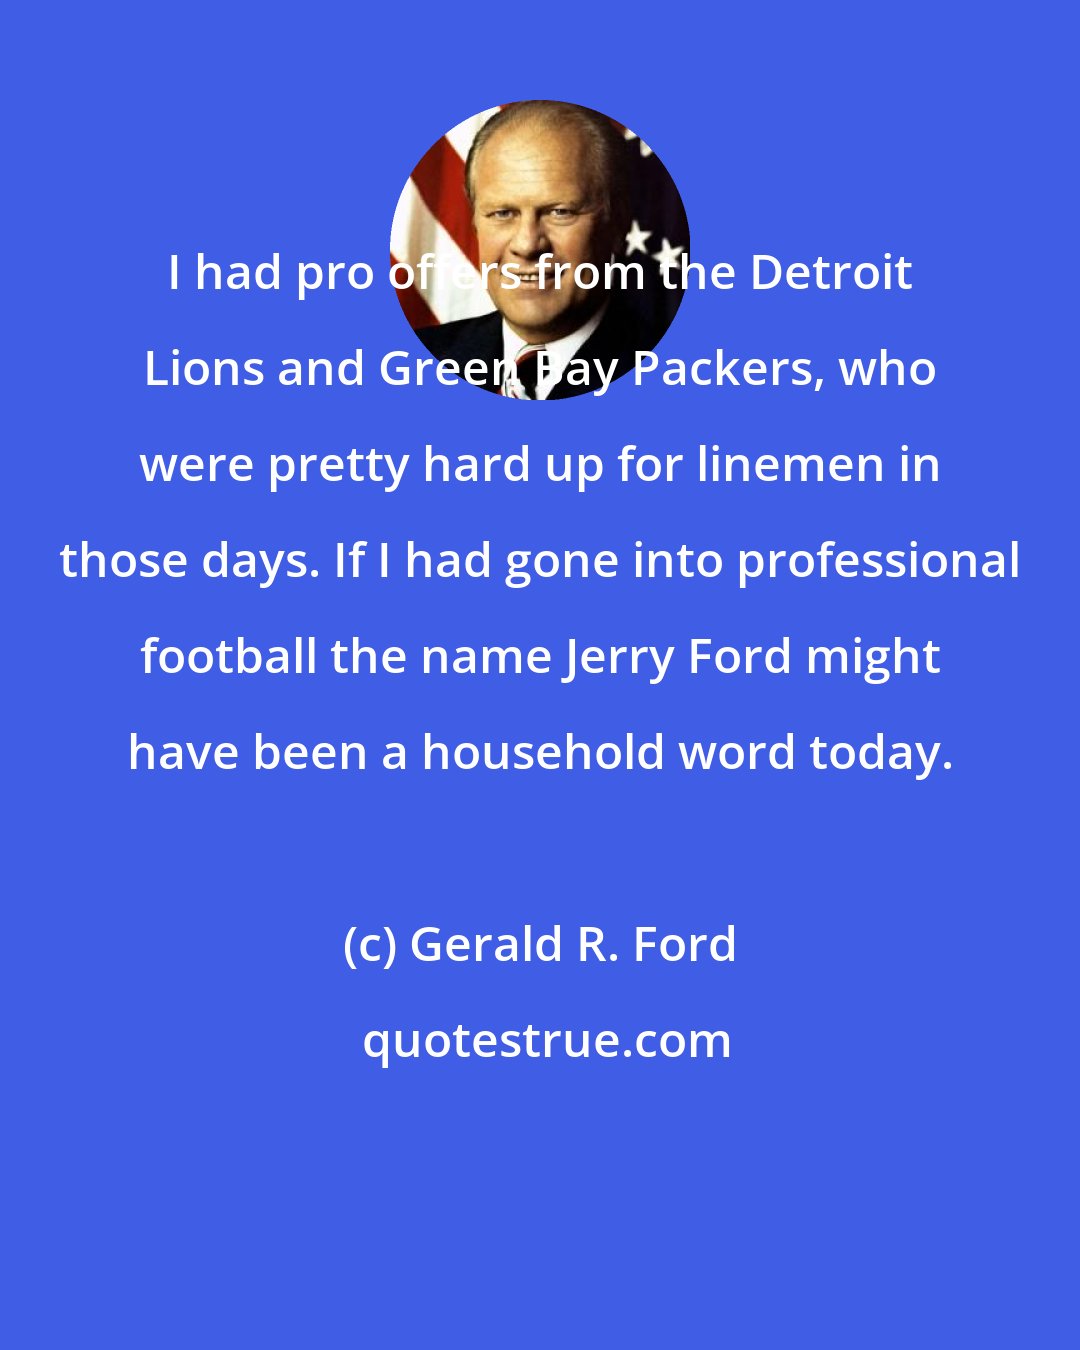 Gerald R. Ford: I had pro offers from the Detroit Lions and Green Bay Packers, who were pretty hard up for linemen in those days. If I had gone into professional football the name Jerry Ford might have been a household word today.